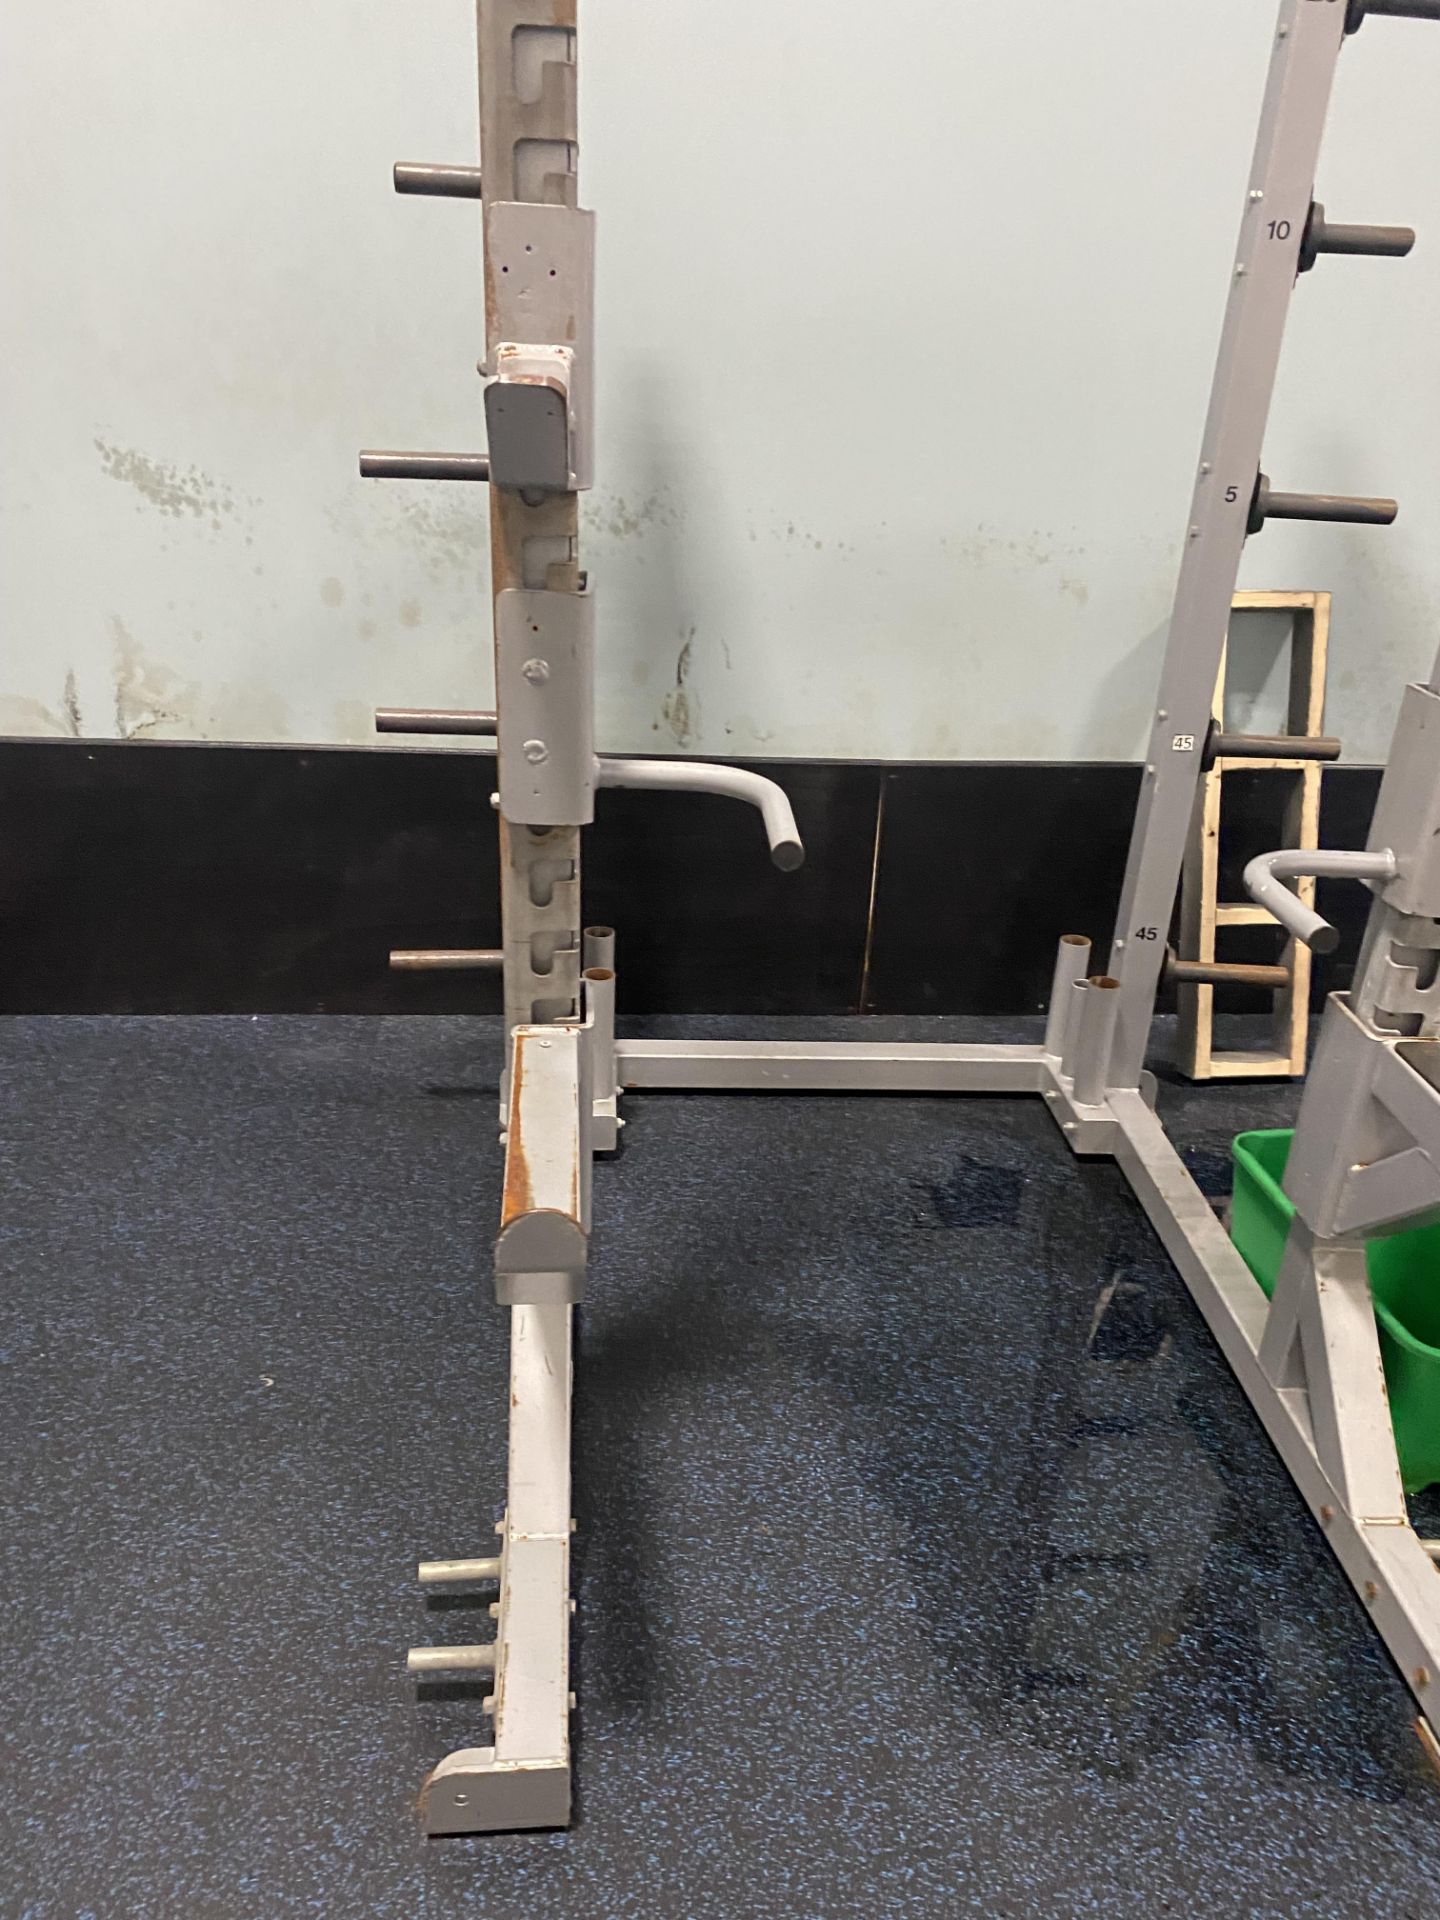 Squat Rack w/ Safety Bars, Weight Holder, and Pull up Bar (No Weights) - Image 4 of 4